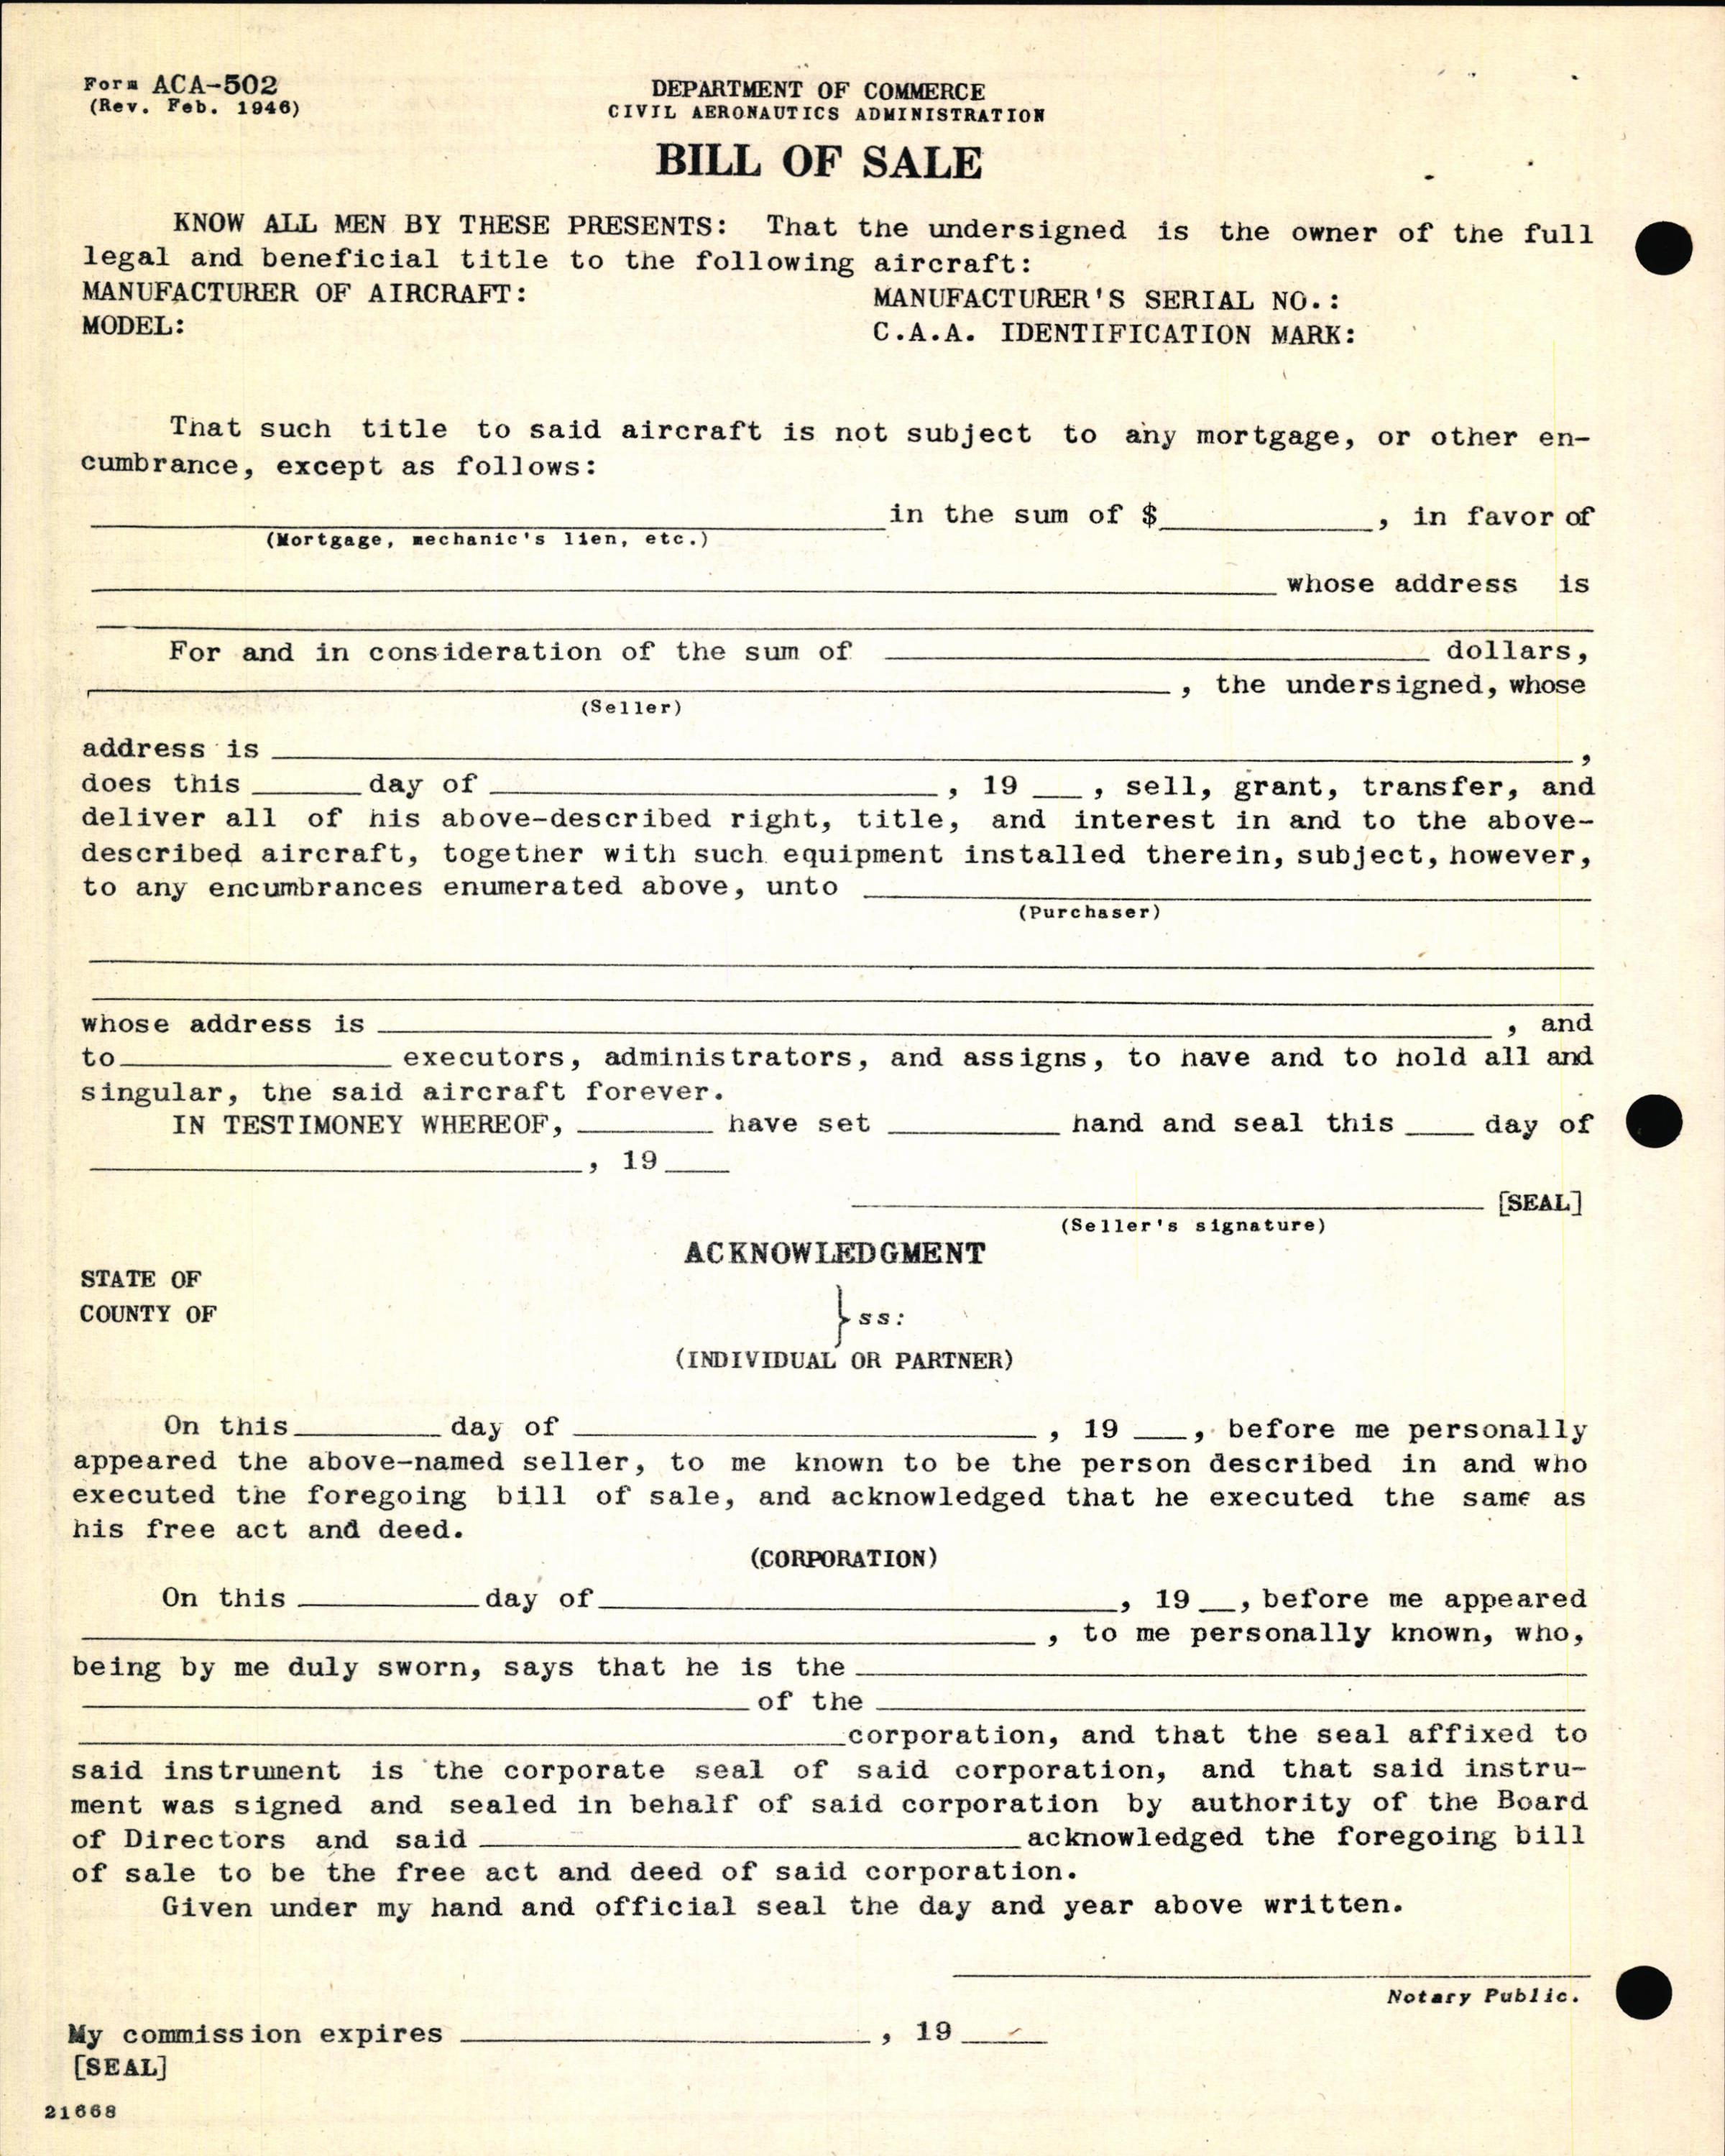 Sample page 6 from AirCorps Library document: Technical Information for Serial Number 1257